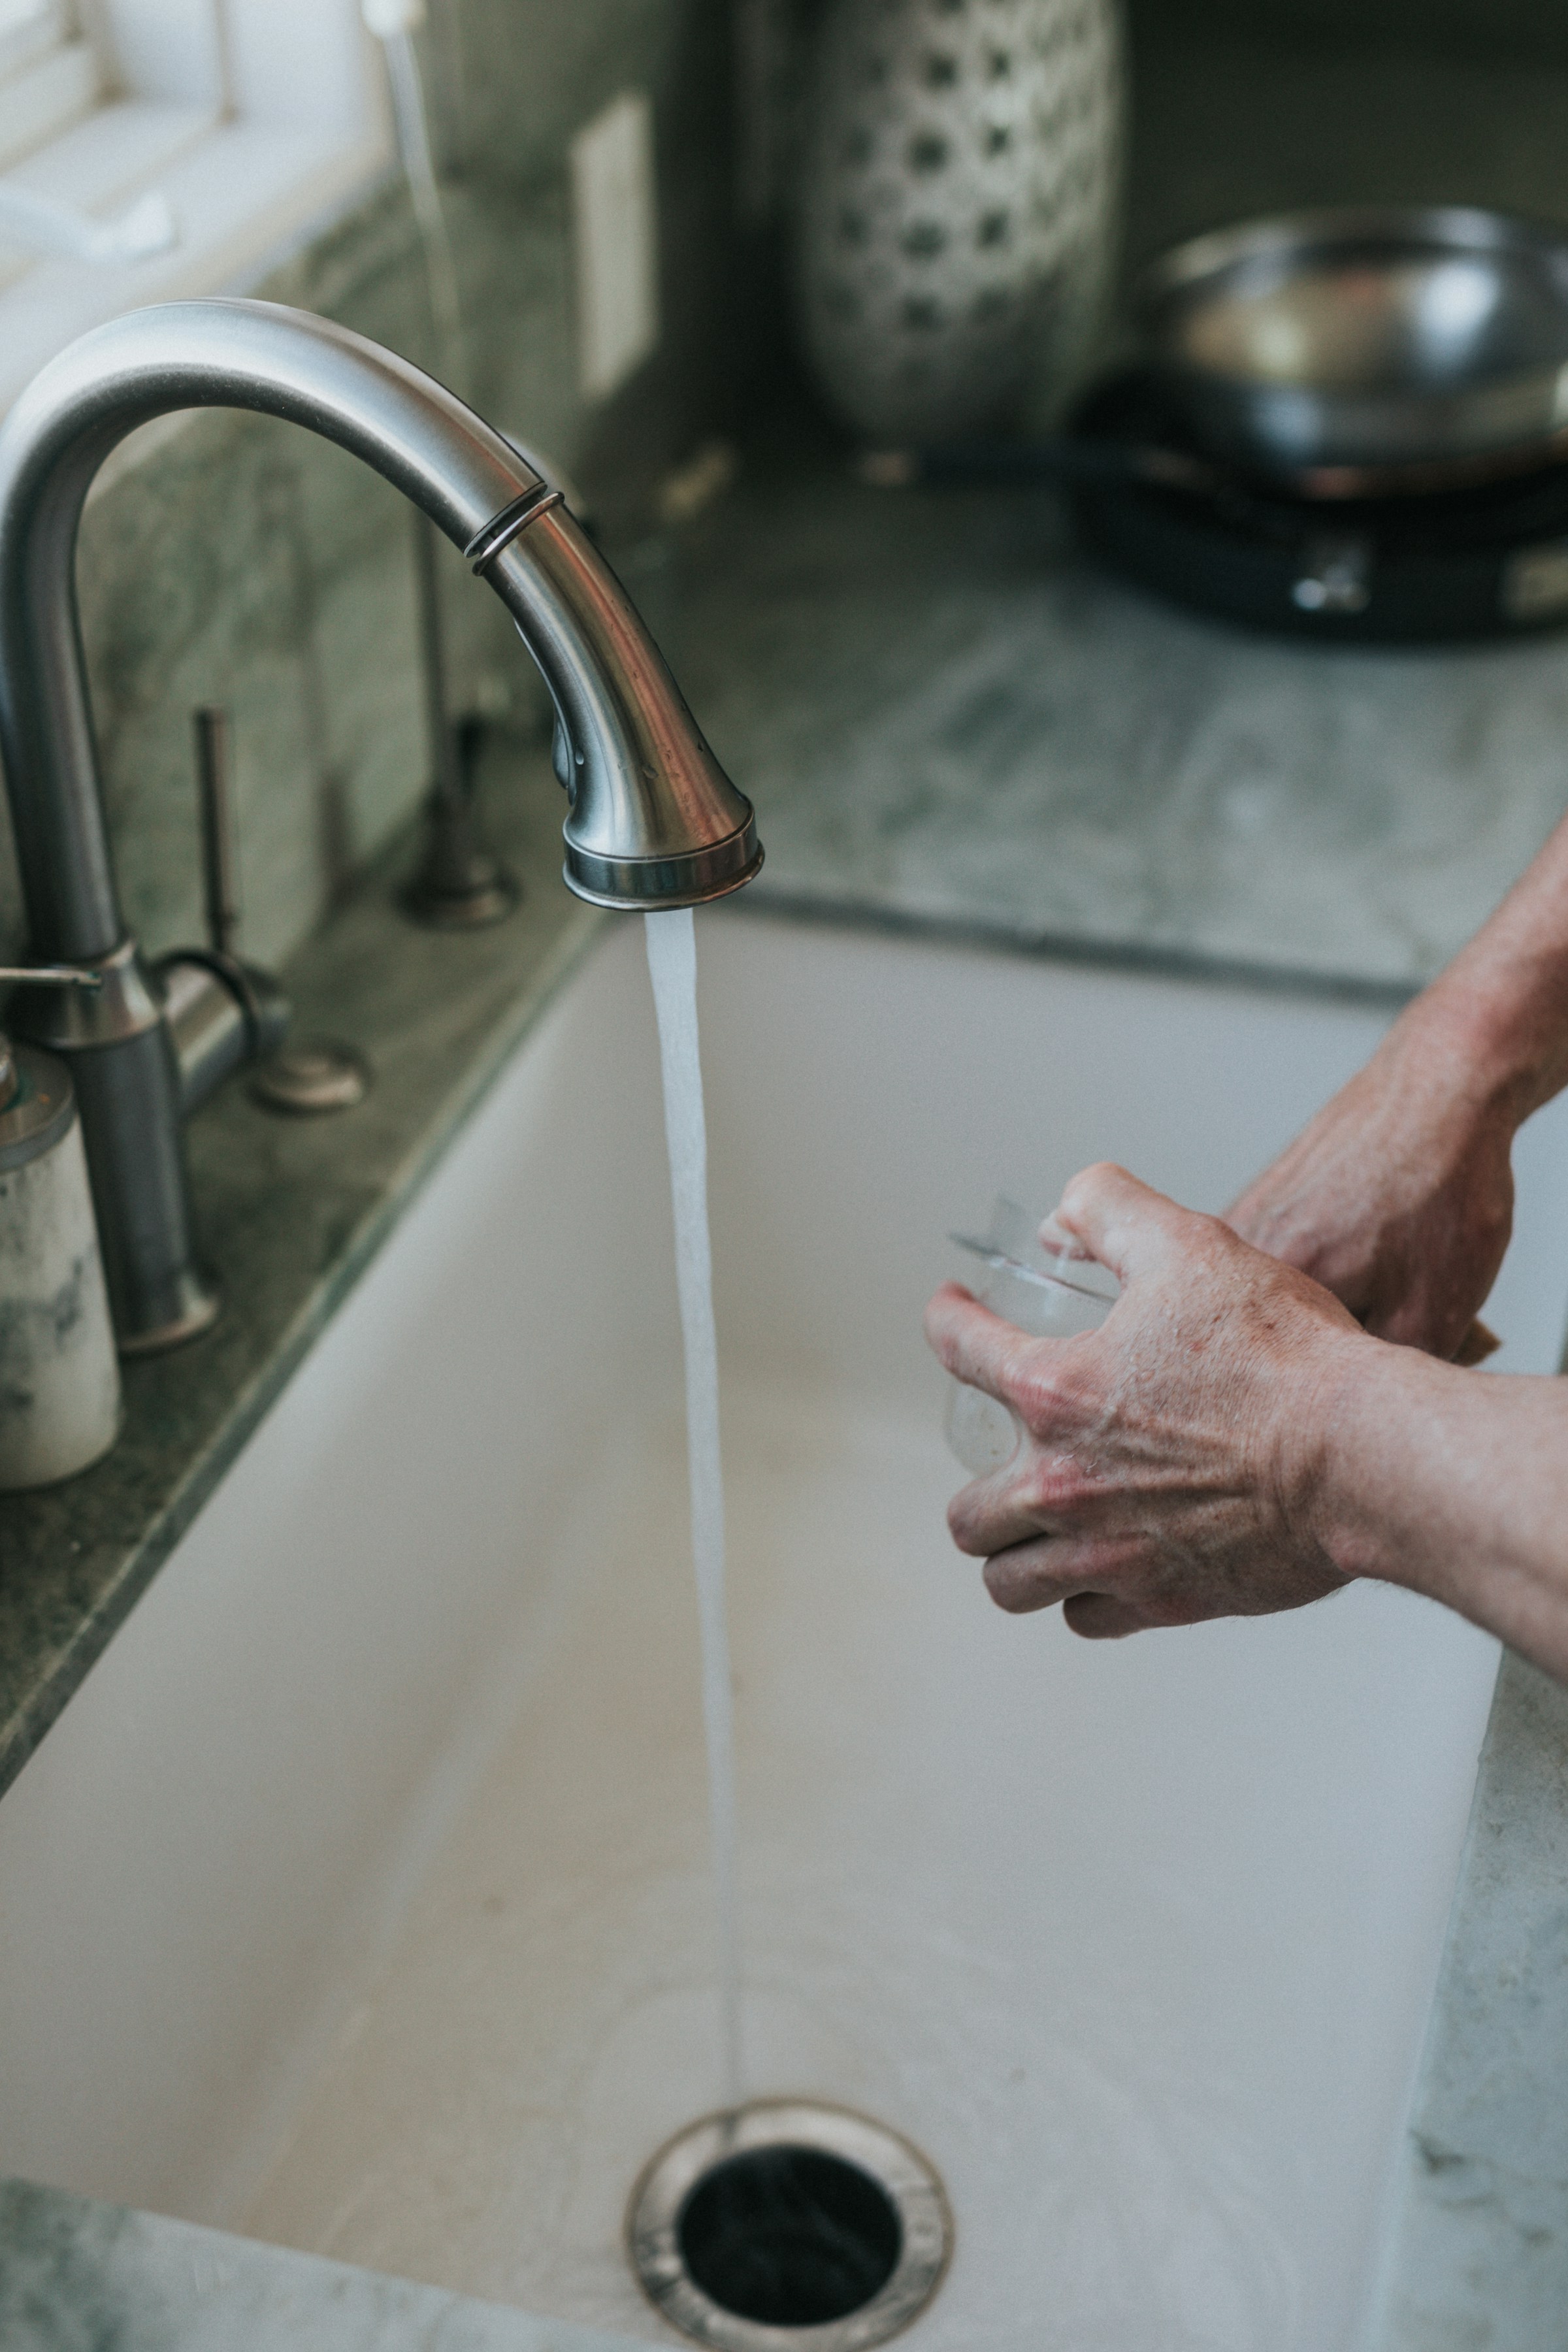 A person washing dishes | Source: Unsplash